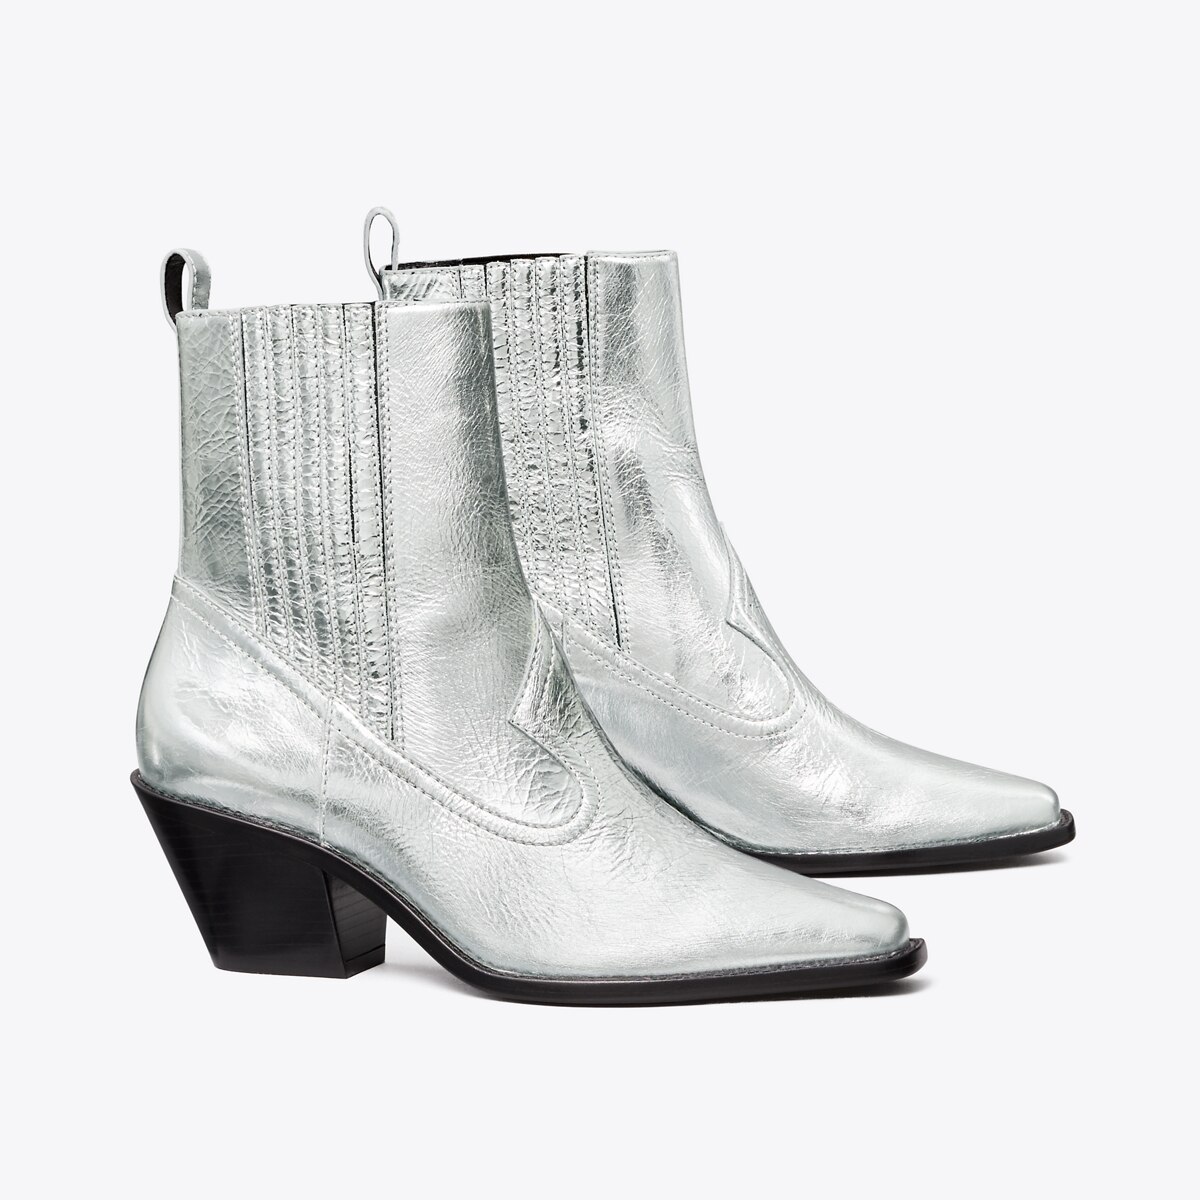 leerling cassette voorbeeld Western Ankle Boot: Women's Shoes | Ankle Boots | Tory Burch EU